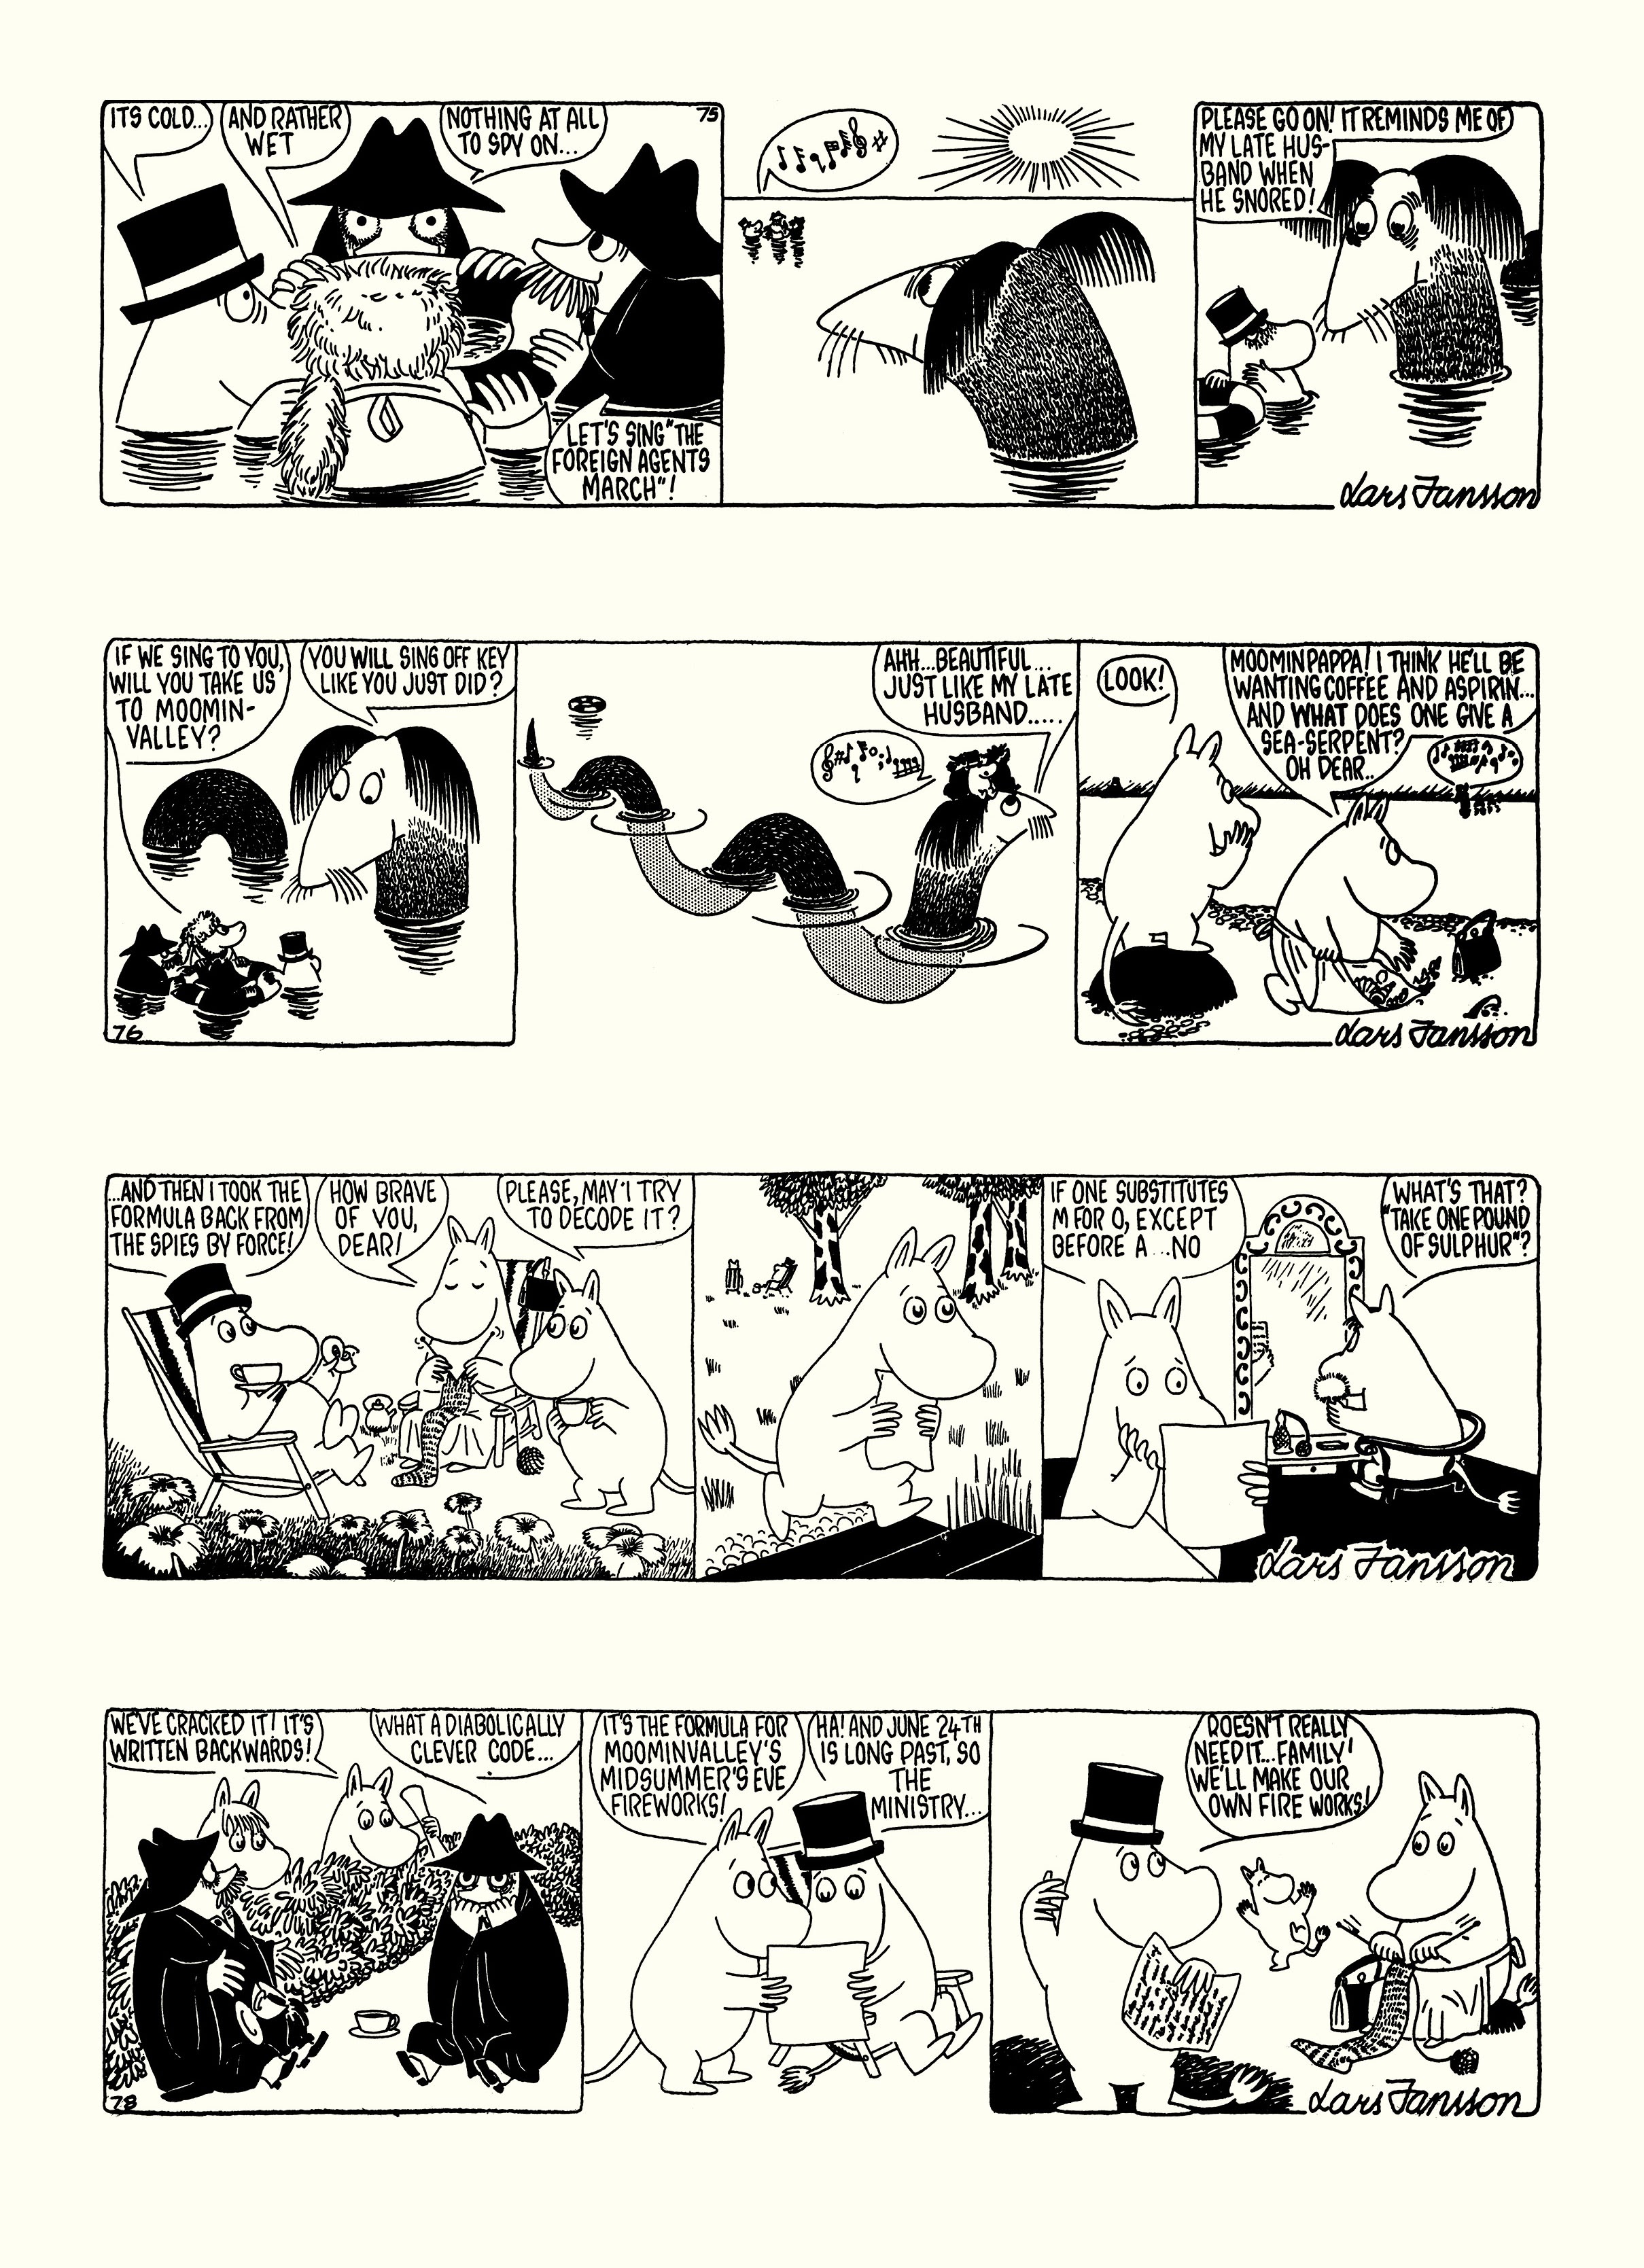 Read online Moomin: The Complete Lars Jansson Comic Strip comic -  Issue # TPB 6 - 66